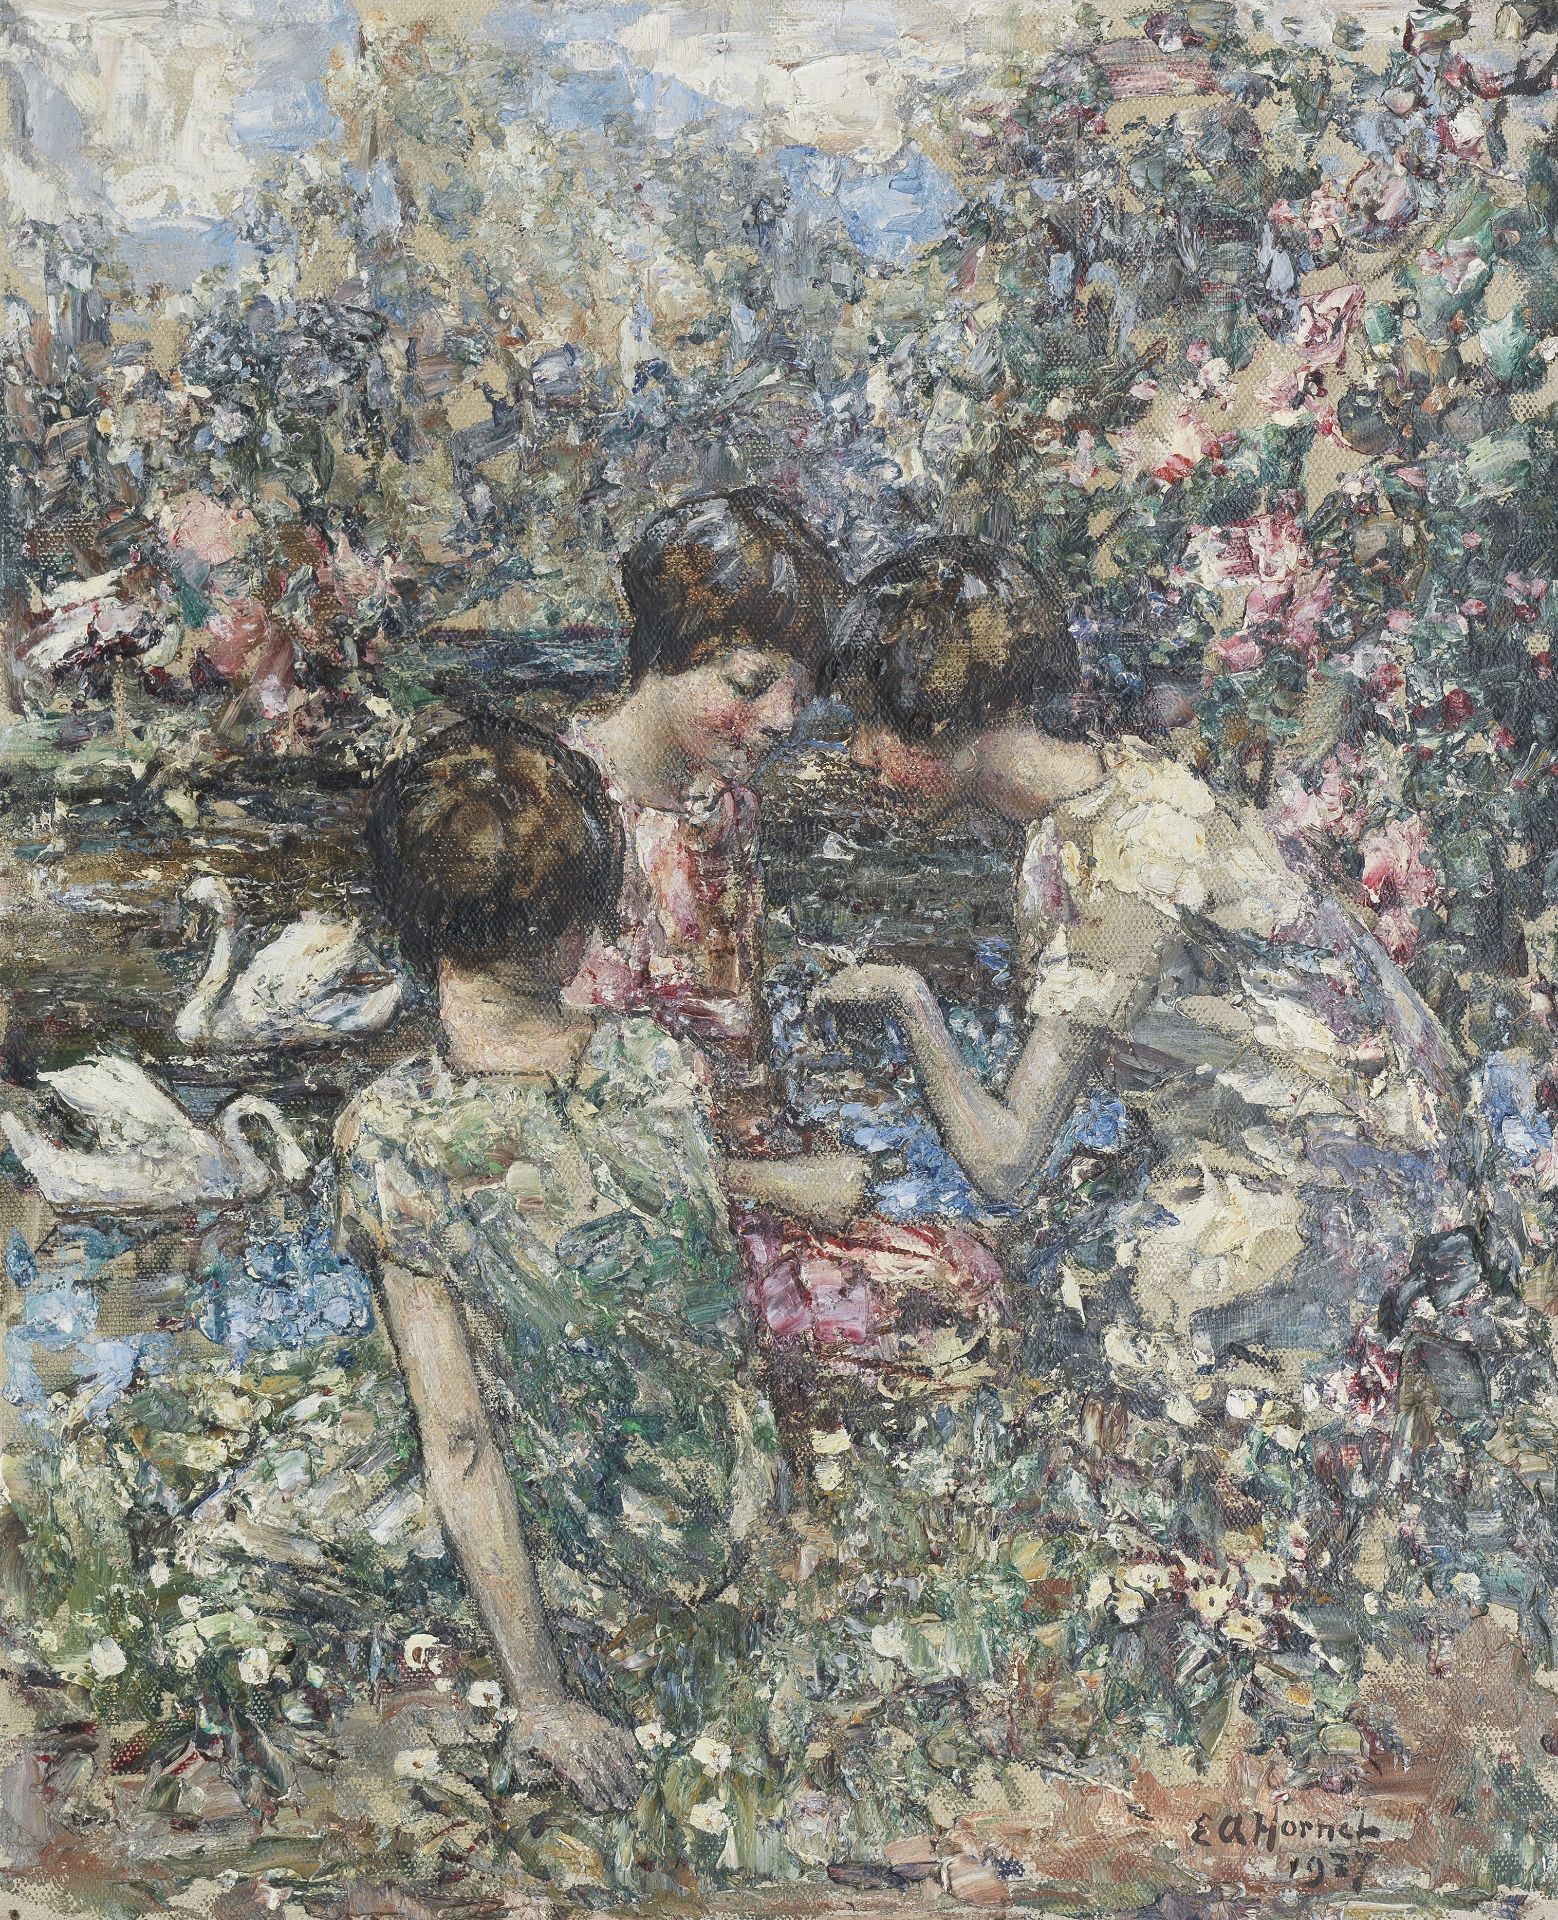 Edward Atkinson Hornel (British, 1864-1933) The Butterfly 61.5 x 51 cm. (24 3/16 x 20 1/16 in.)